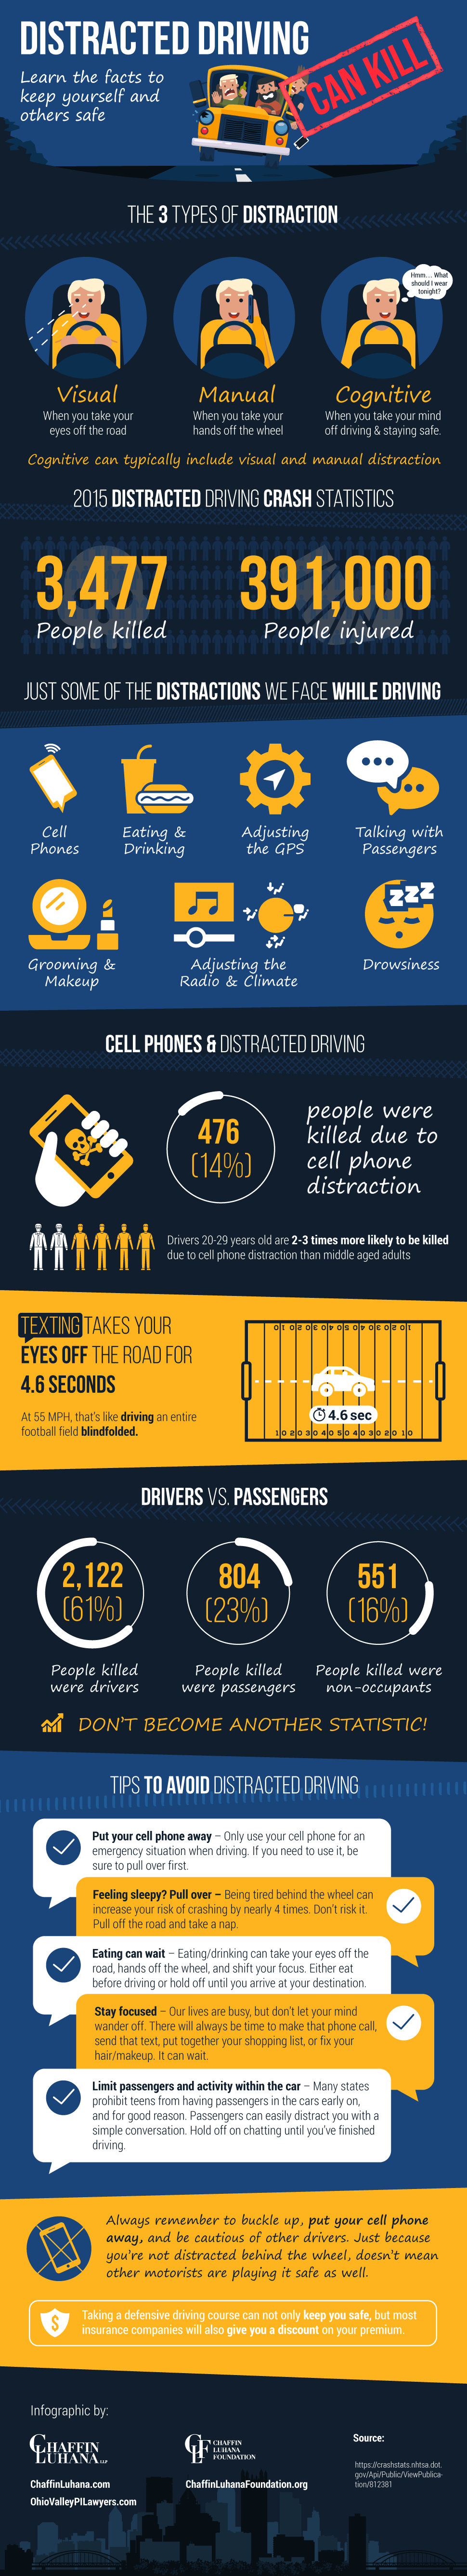 driving statistics by undistracted drivers